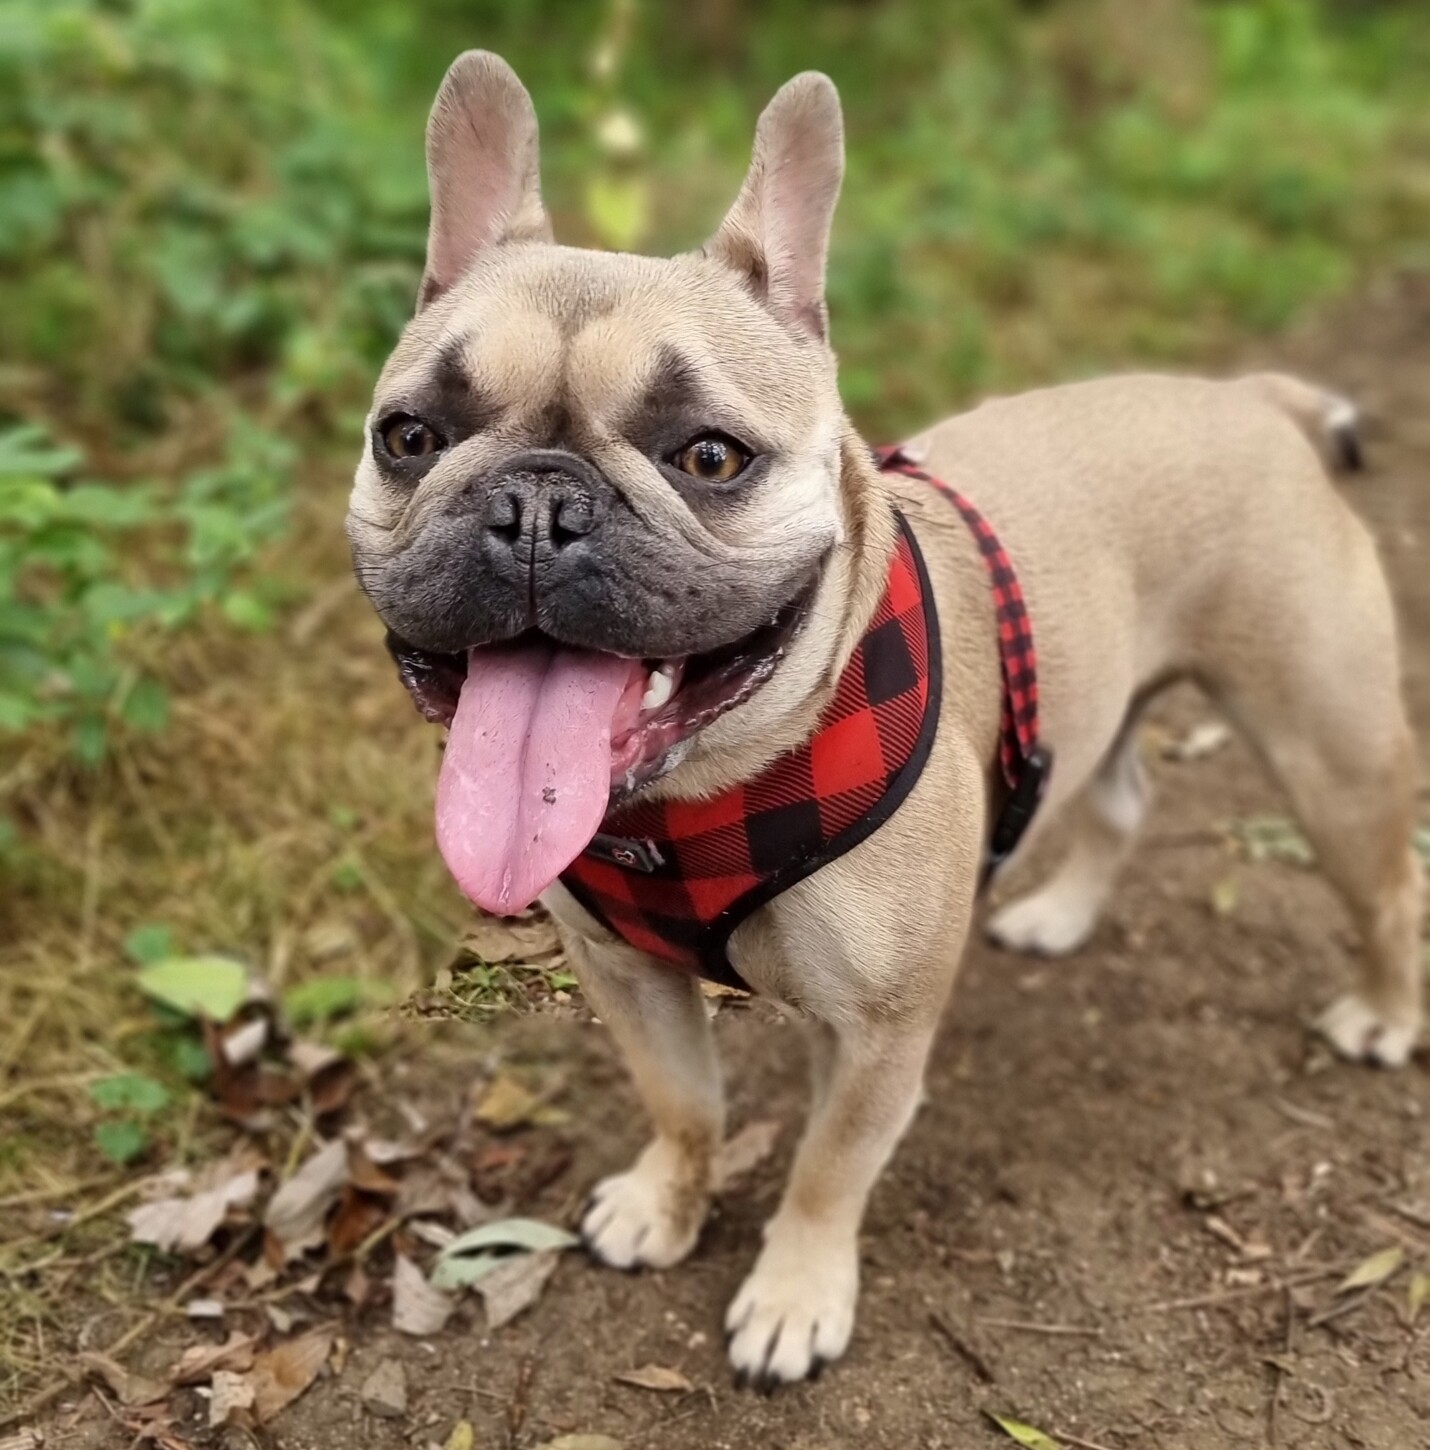 A champagne-coloured French Bulldog with a dark face stands on a dirt path in a young forest. She's wearing a red and black tartan harness and her long tongue is lolling out. 